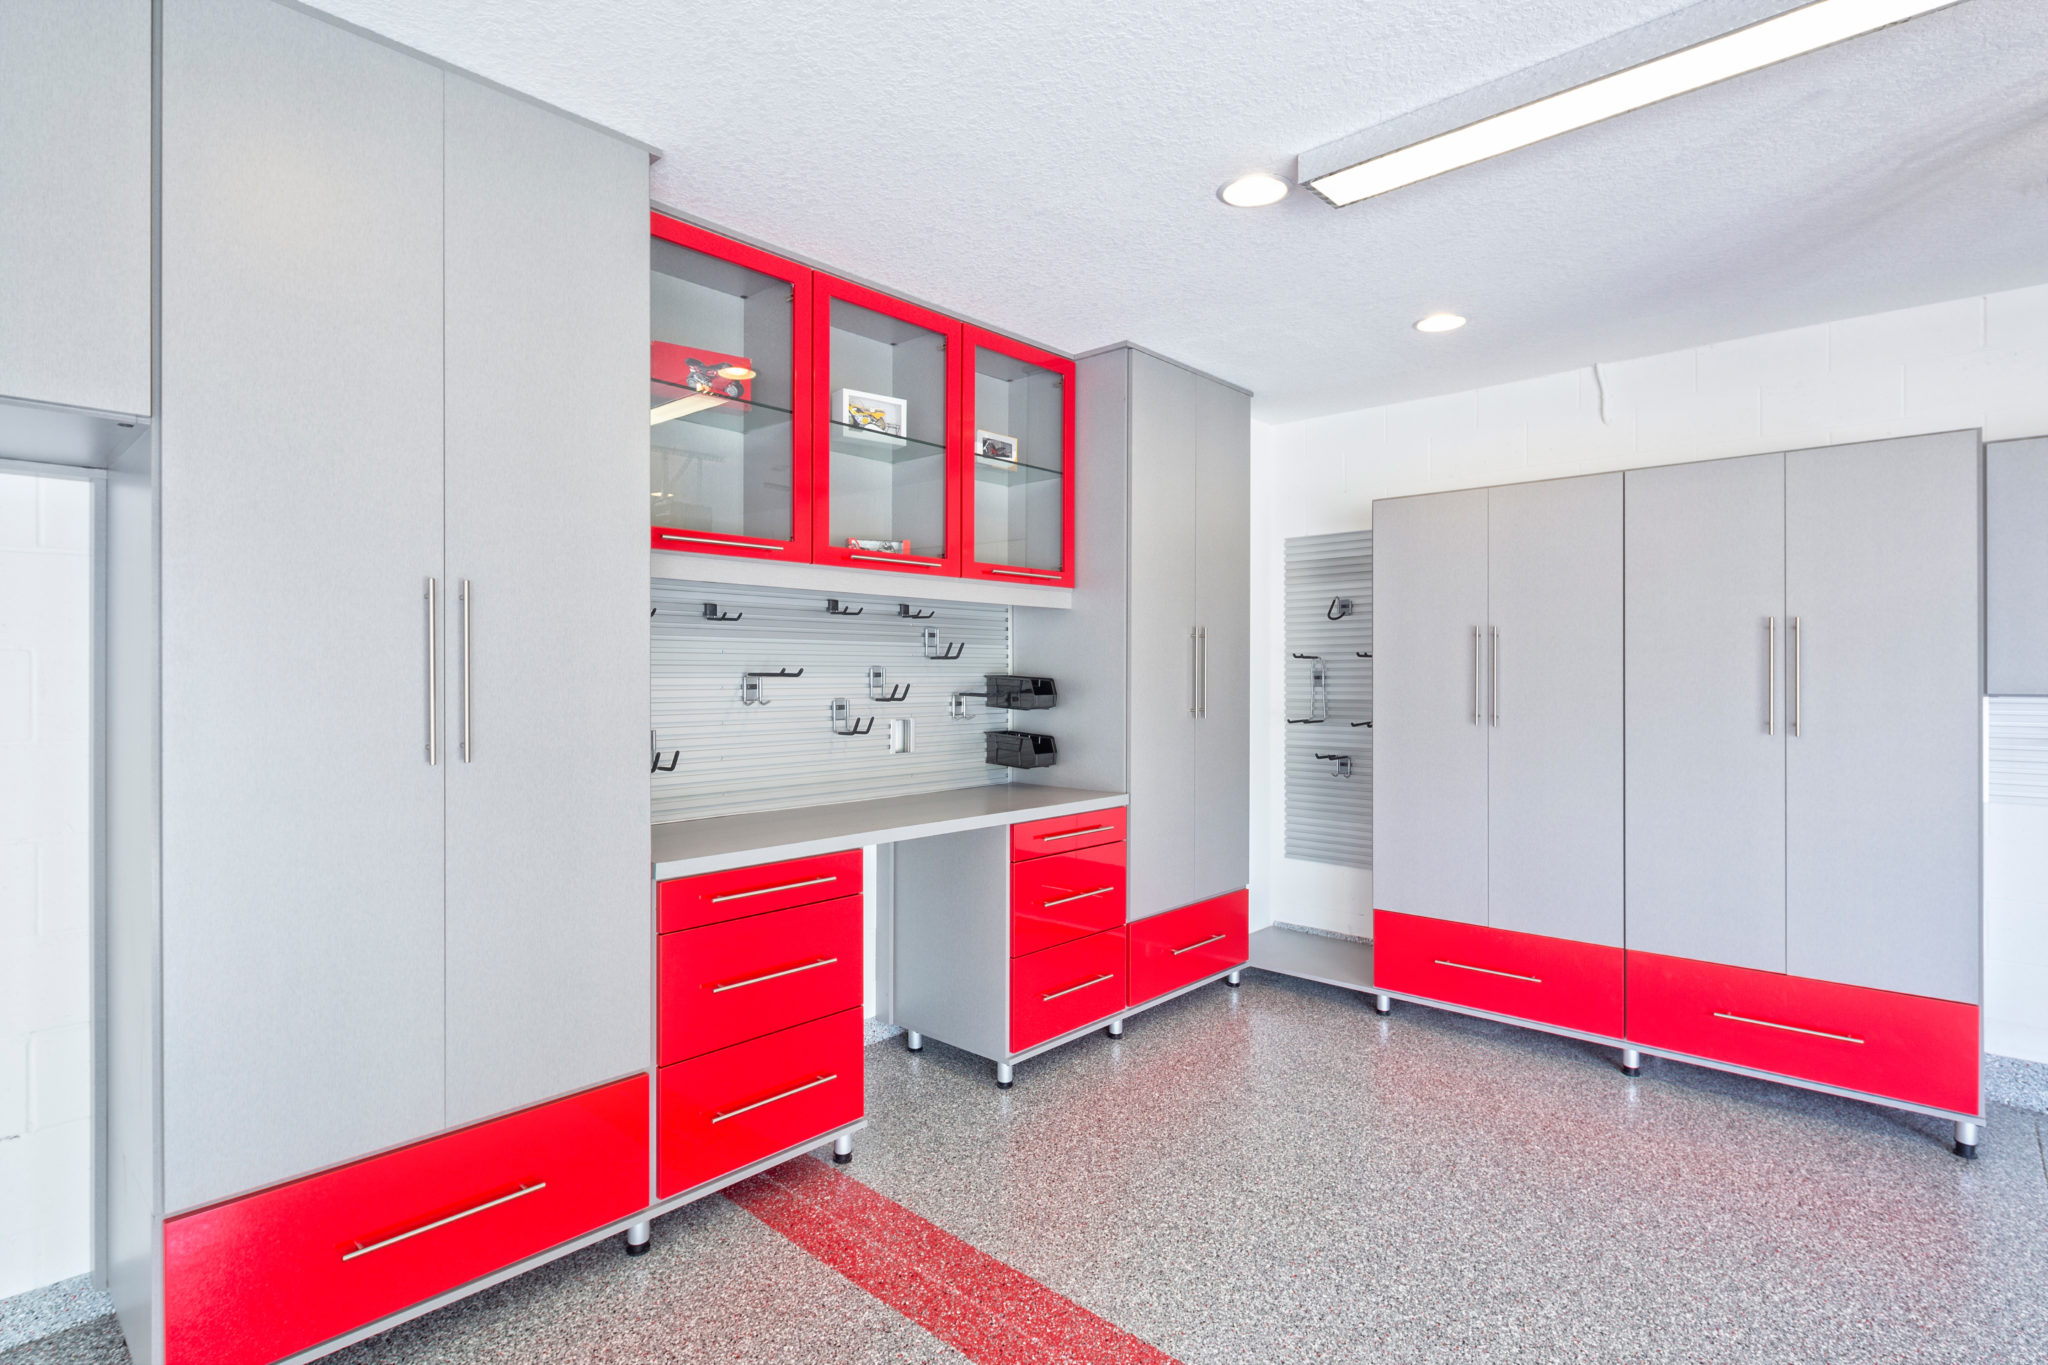 Garage with powder coating on the drawers and shelves